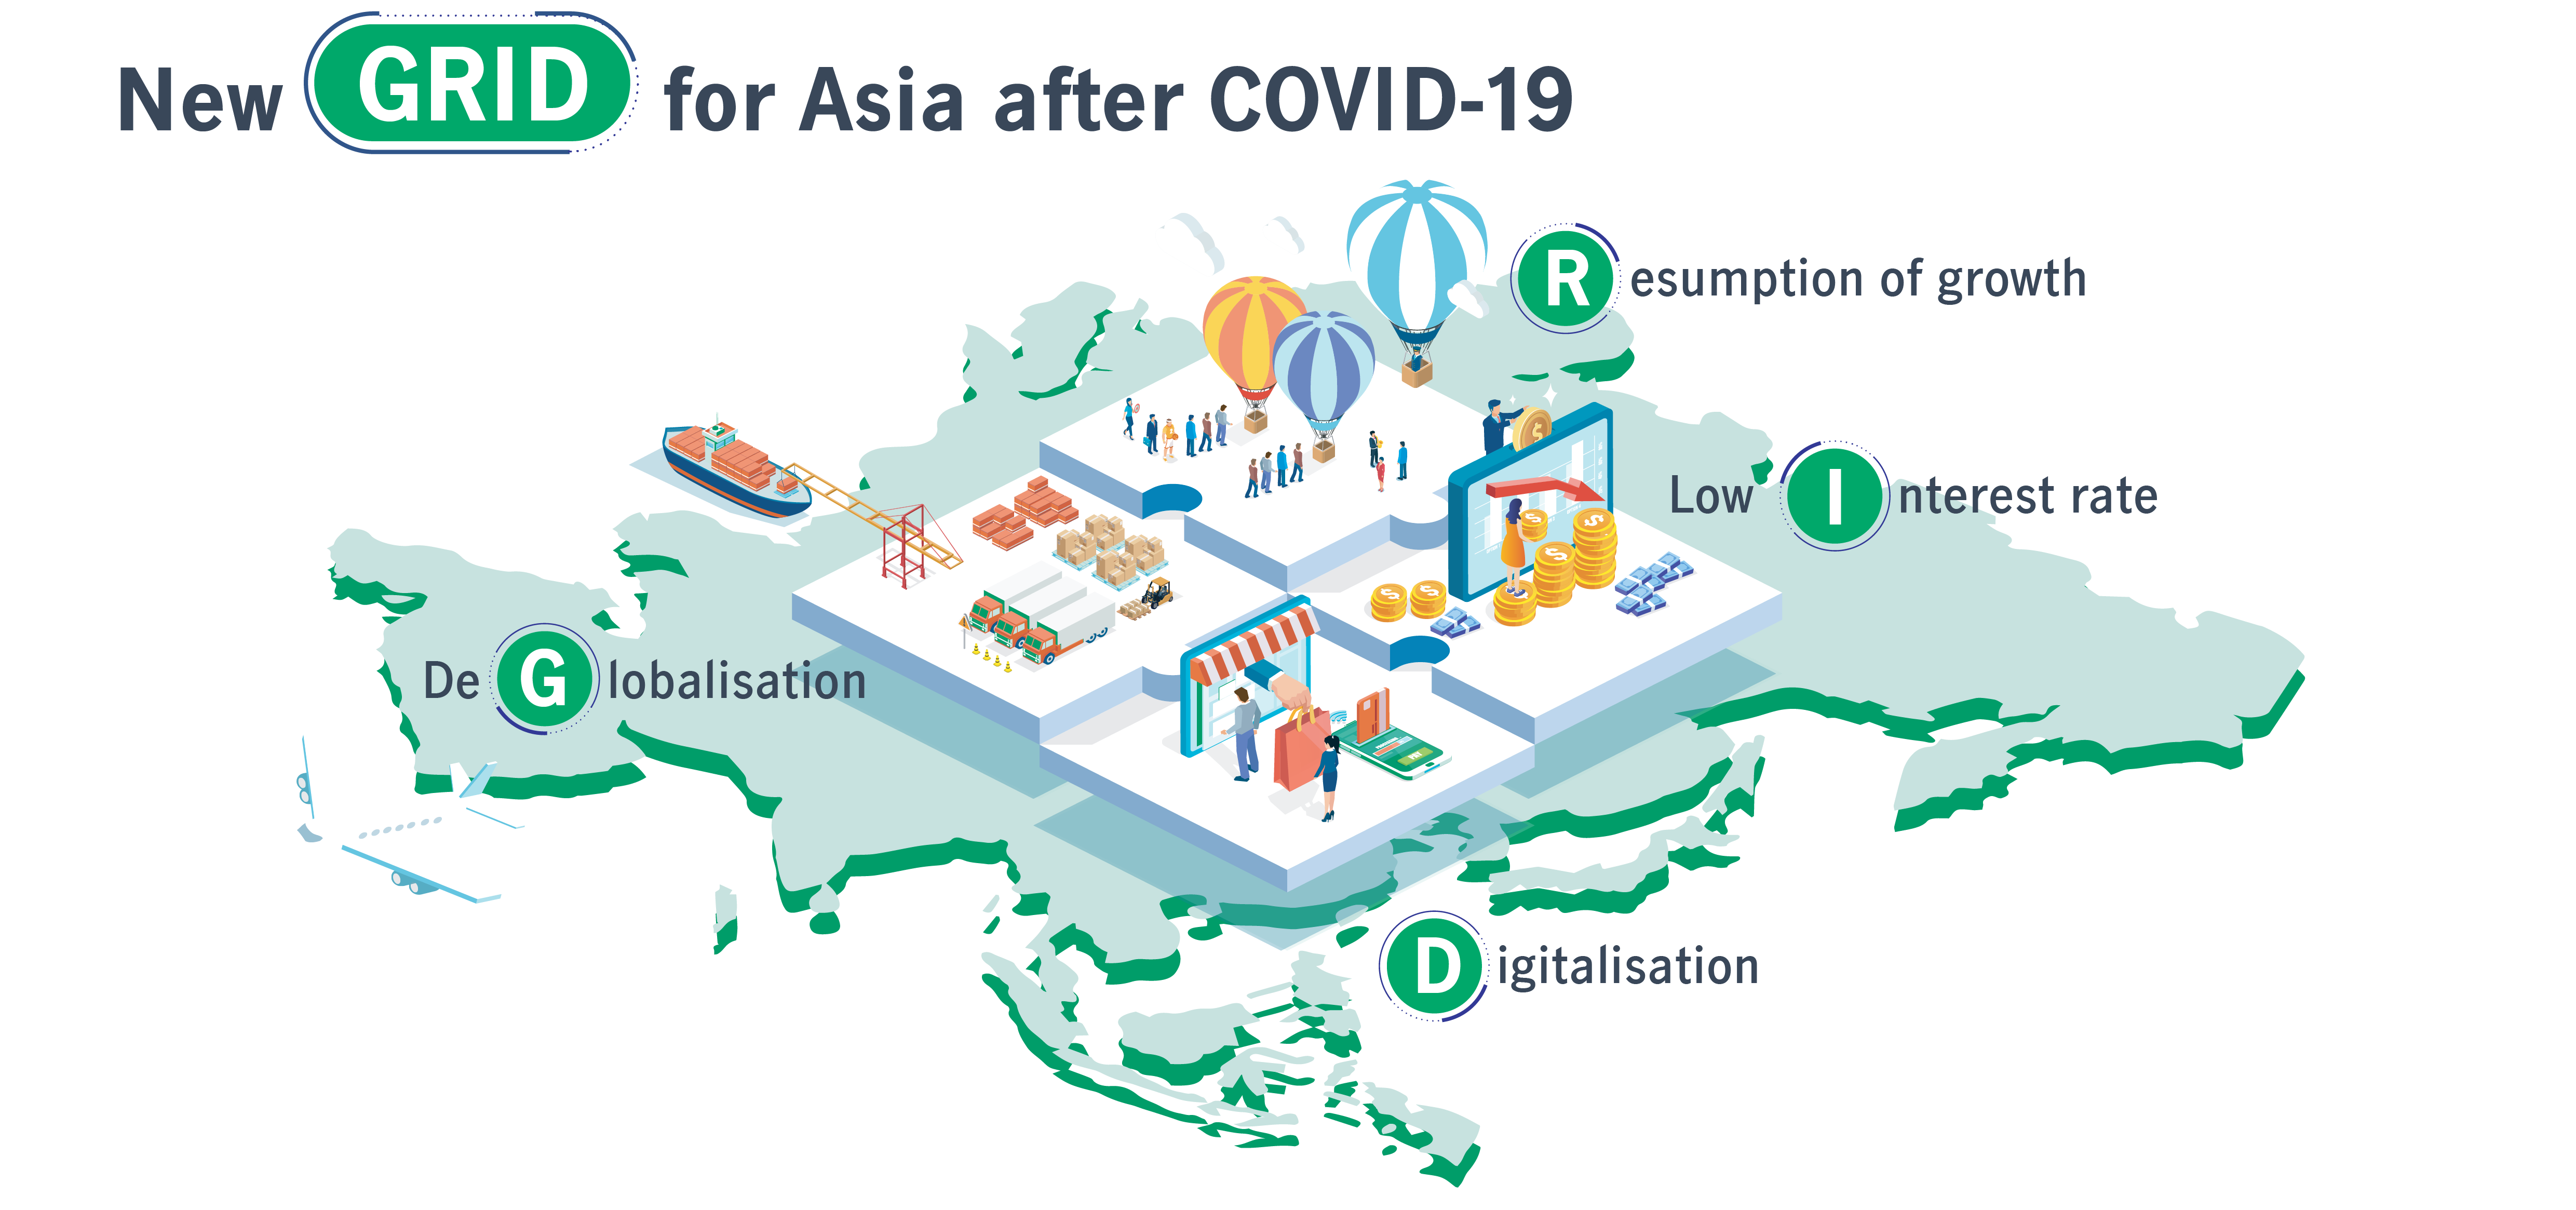 New GRID for Asia after COVID-19